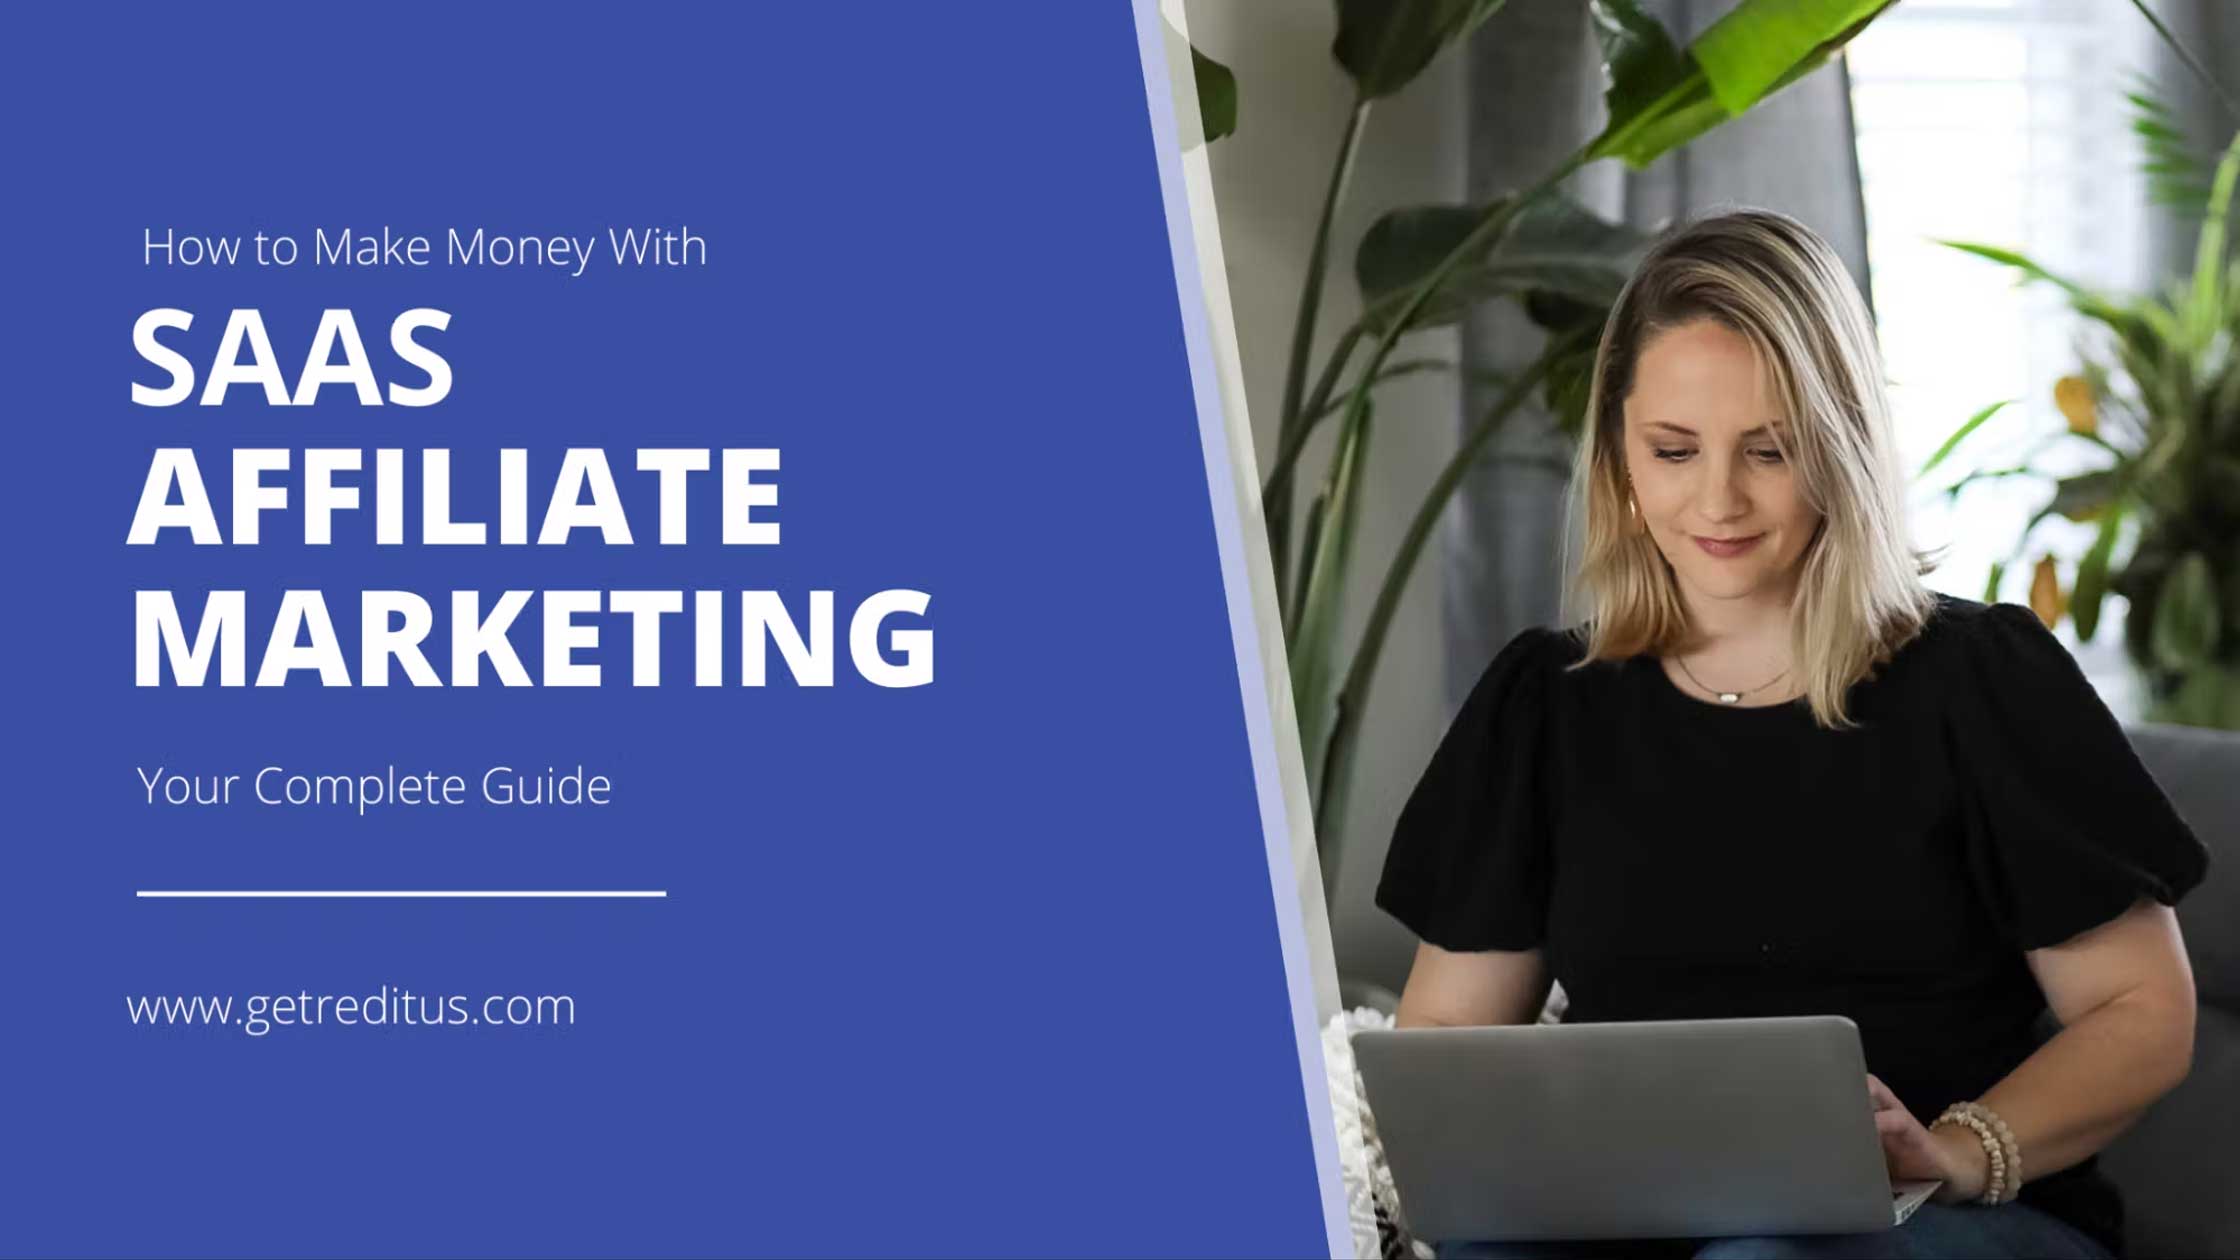 How to Make Money With SaaS Affiliate Marketing: 7 Simple Tips